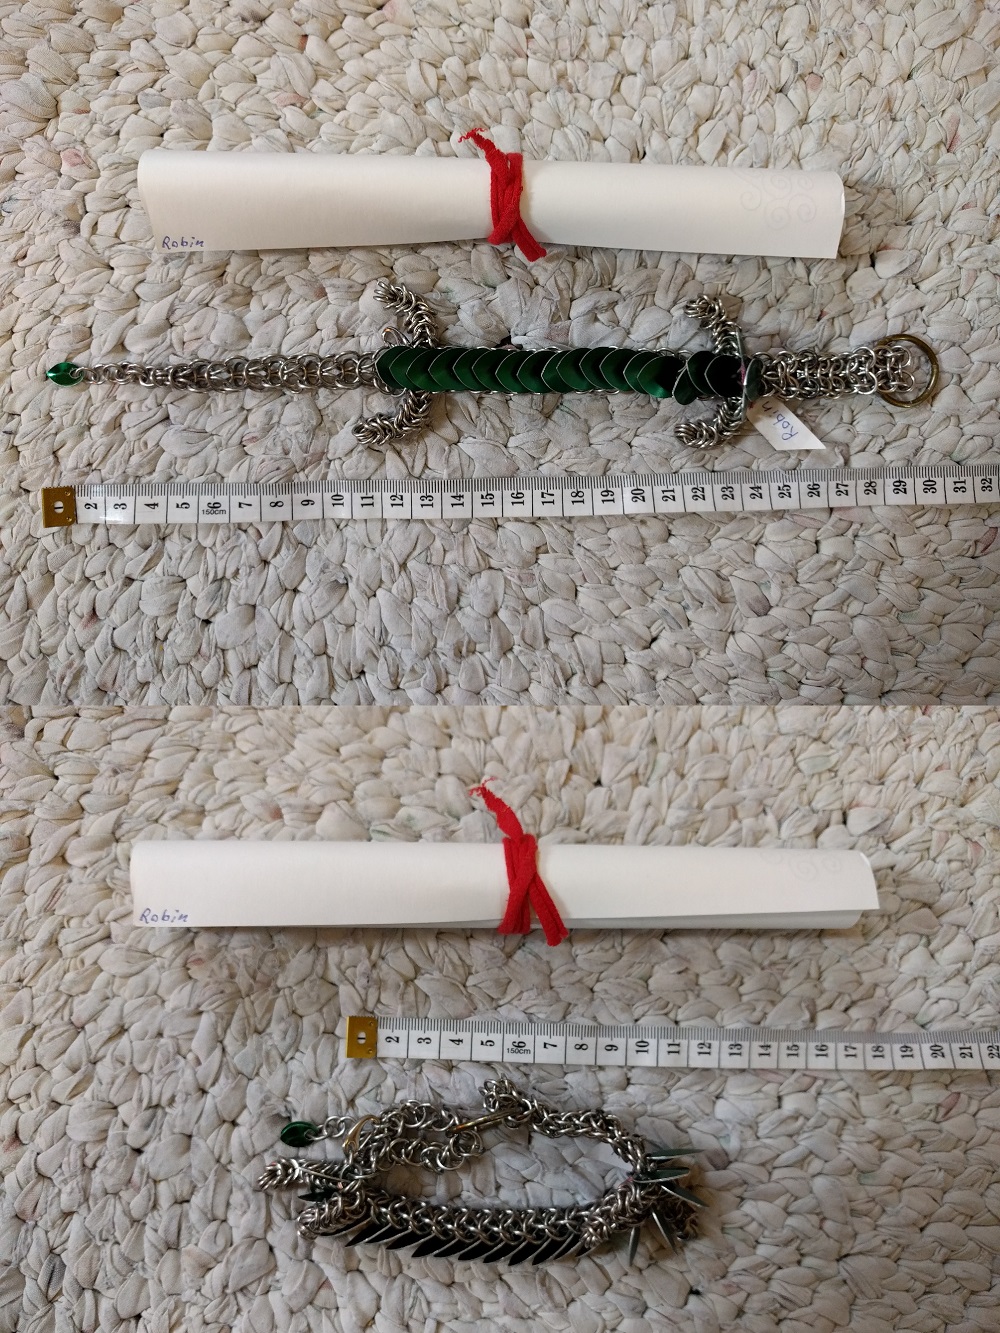 A two part image showing the length of a dragon beside a rolled up scroll, and a small measuring tape showing the dragon about 30 centimeters long outstretched, and about 10 centimeters looped. The dragon in this example is Robin.